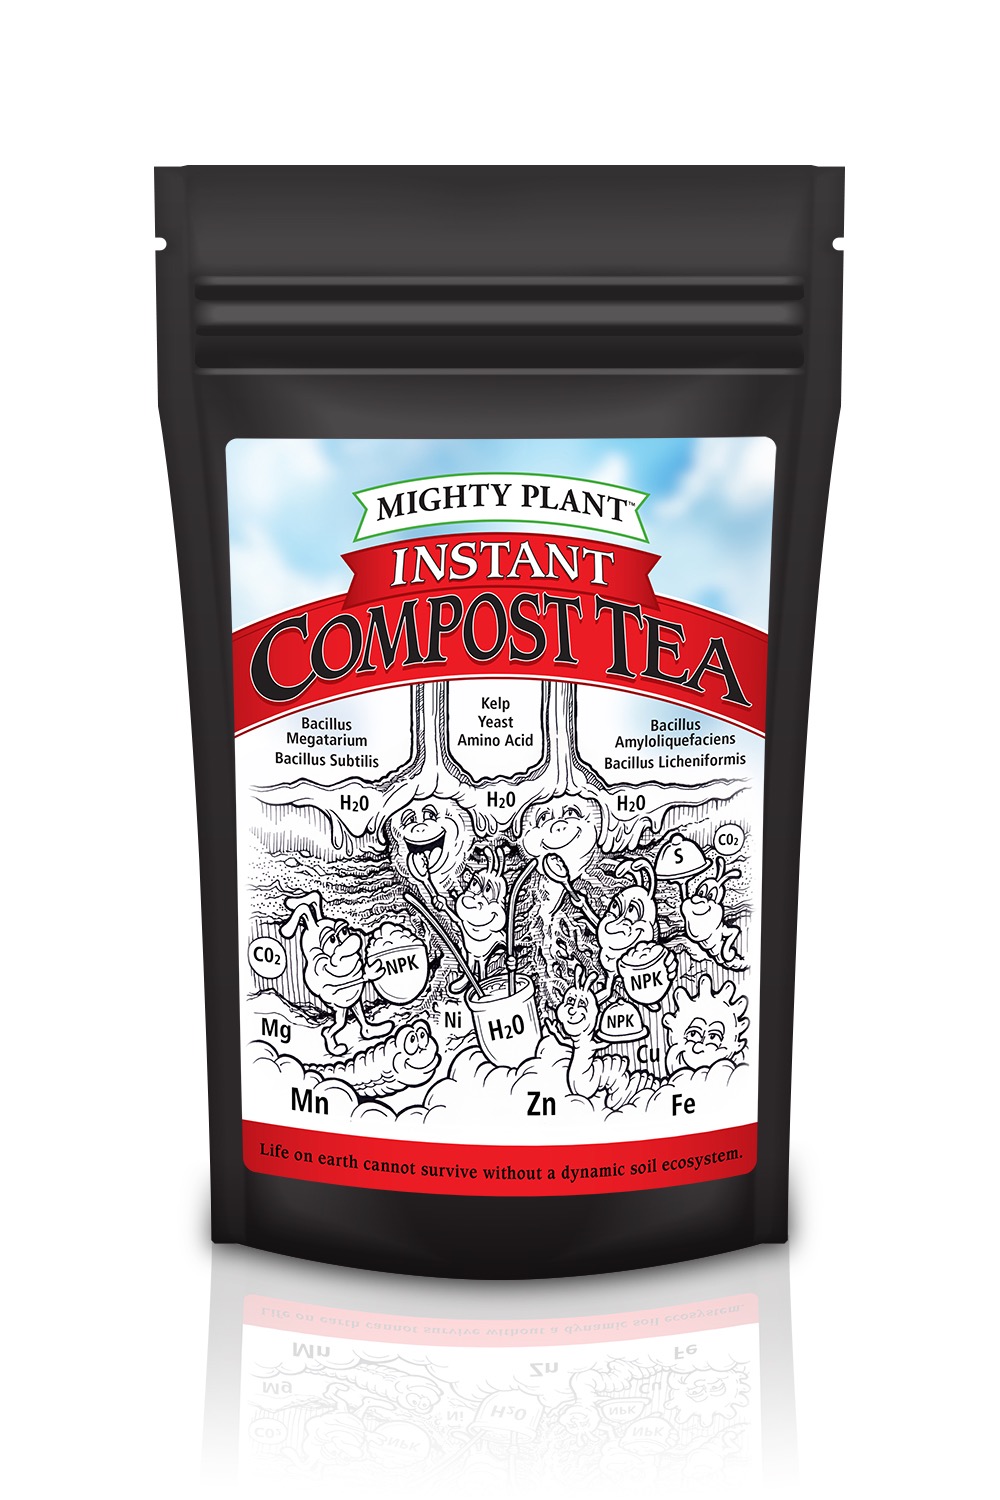 Instant Compost Tea:  A New Category of Plant and Soil Supplements 81